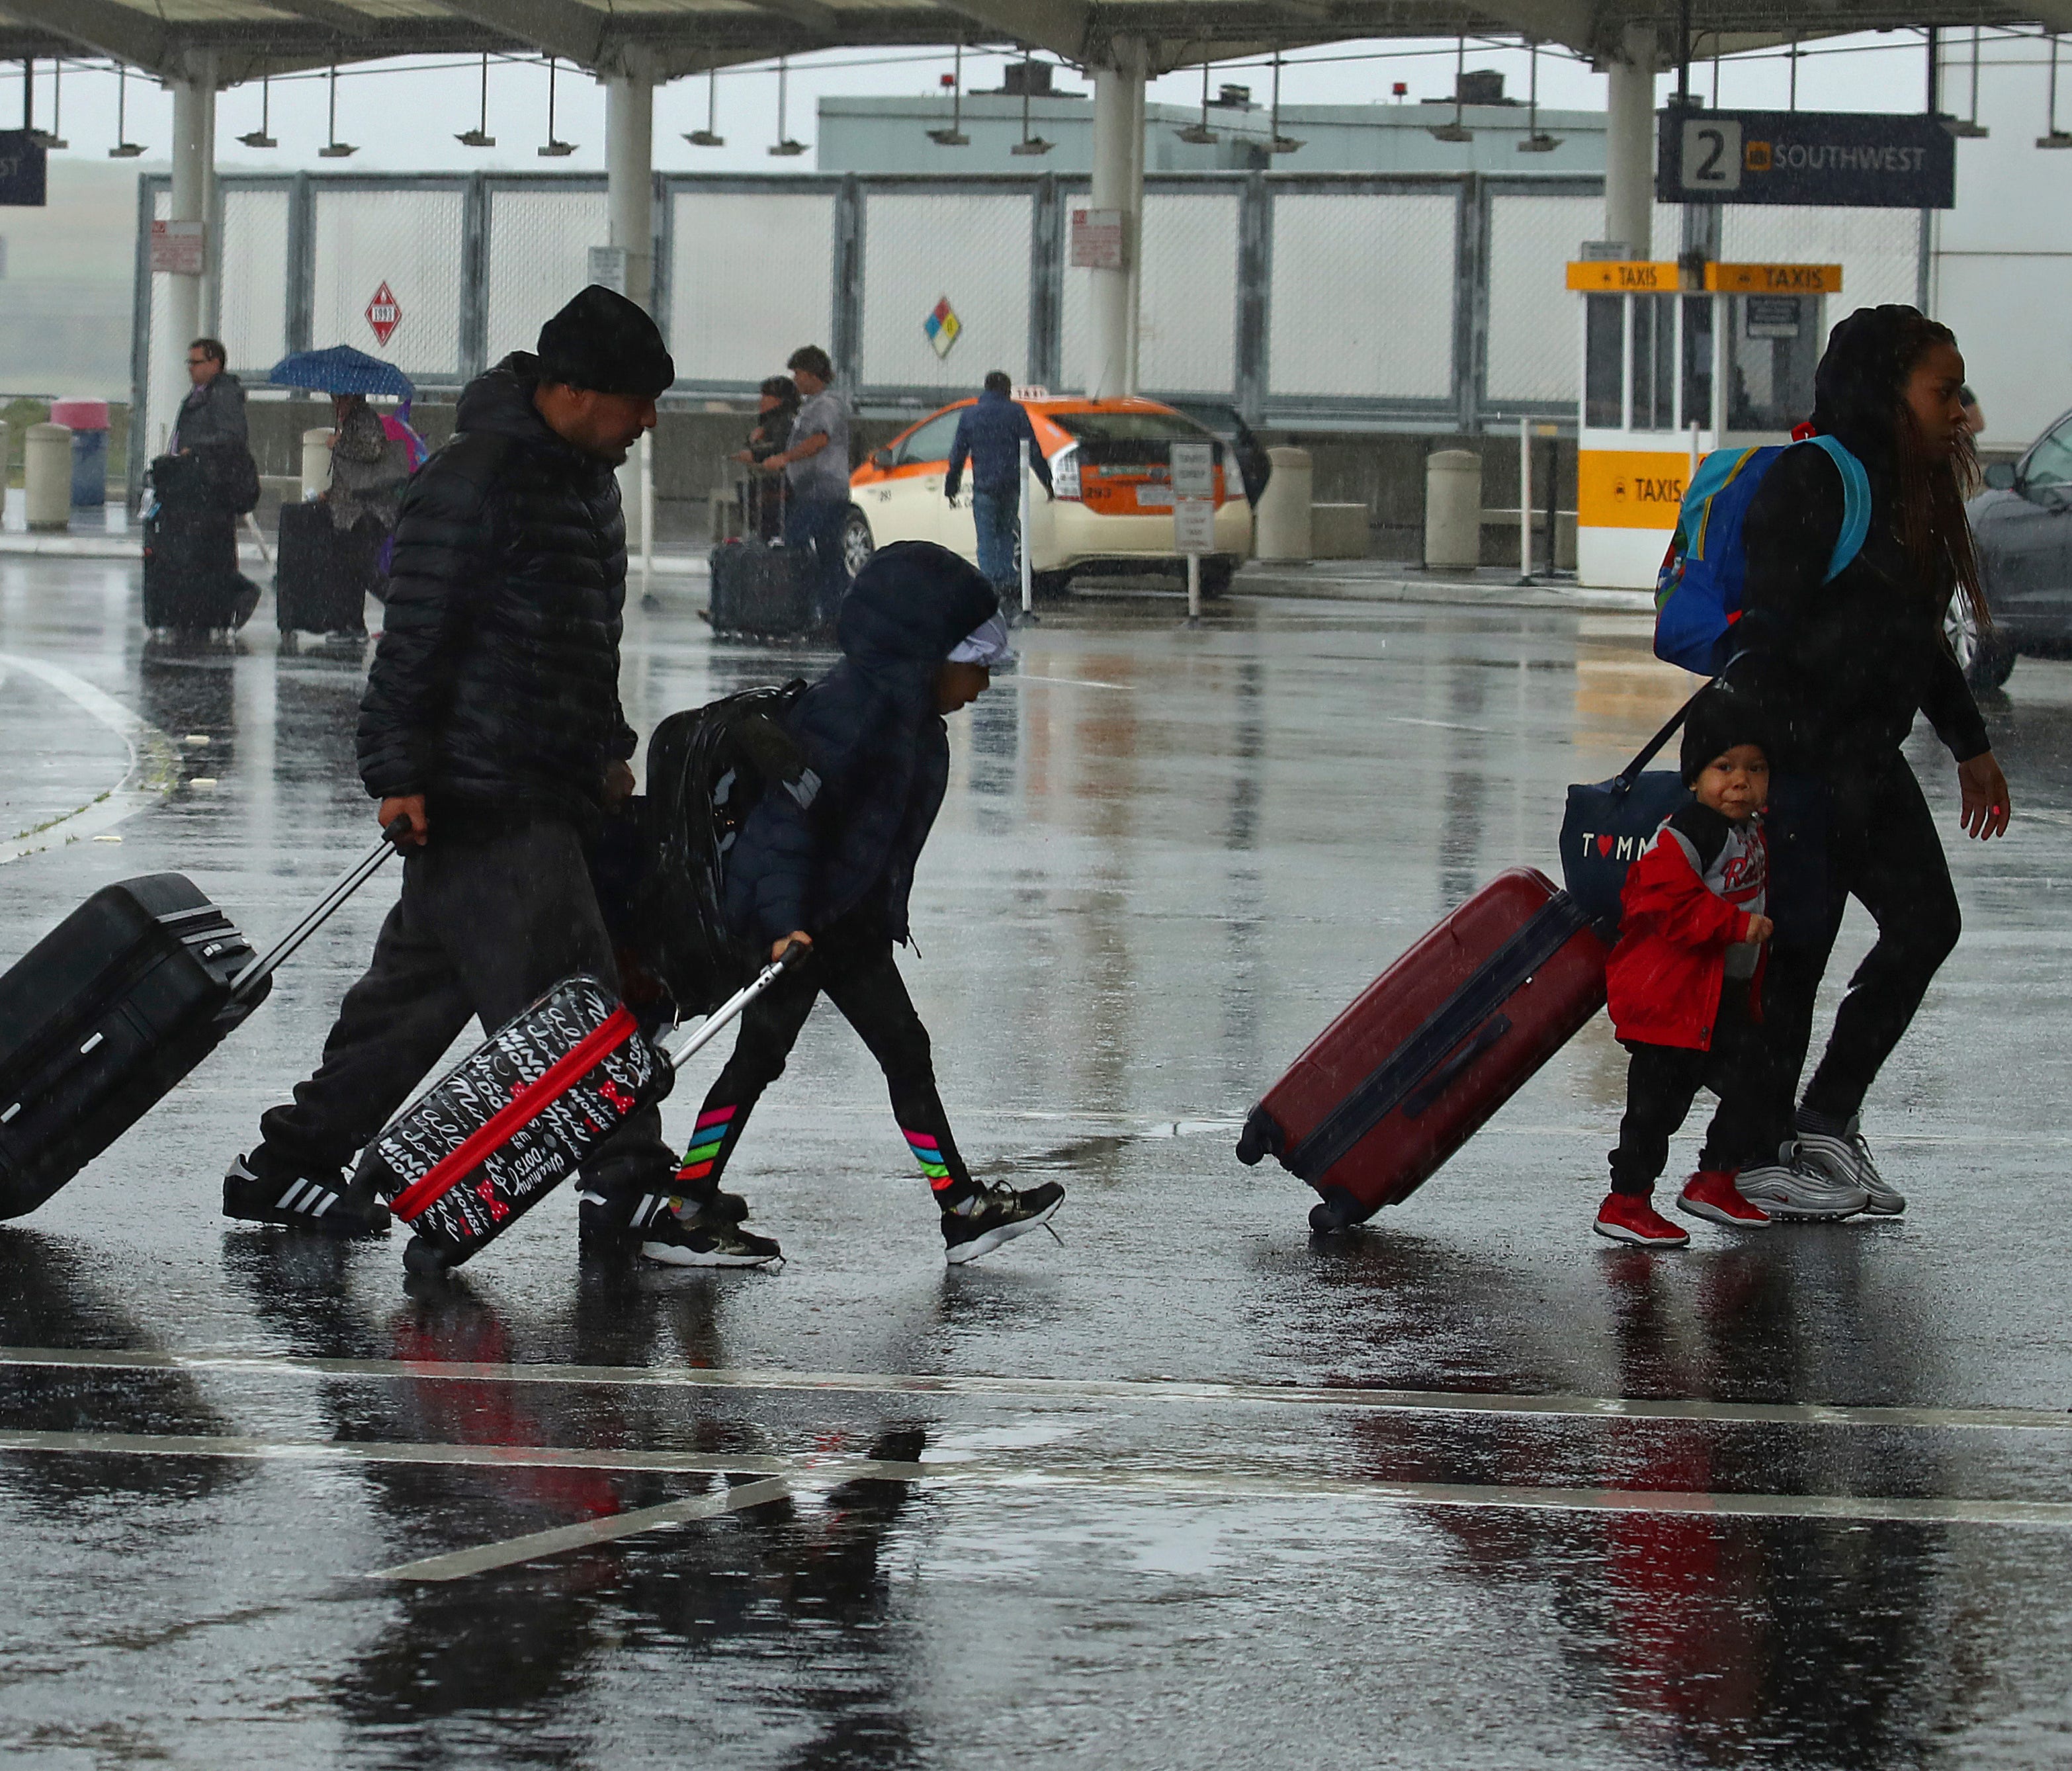 Travelers walk during a rainstorm to the terminals at Oakland International Airport on April 6, 2018, in Oakland, Calif.